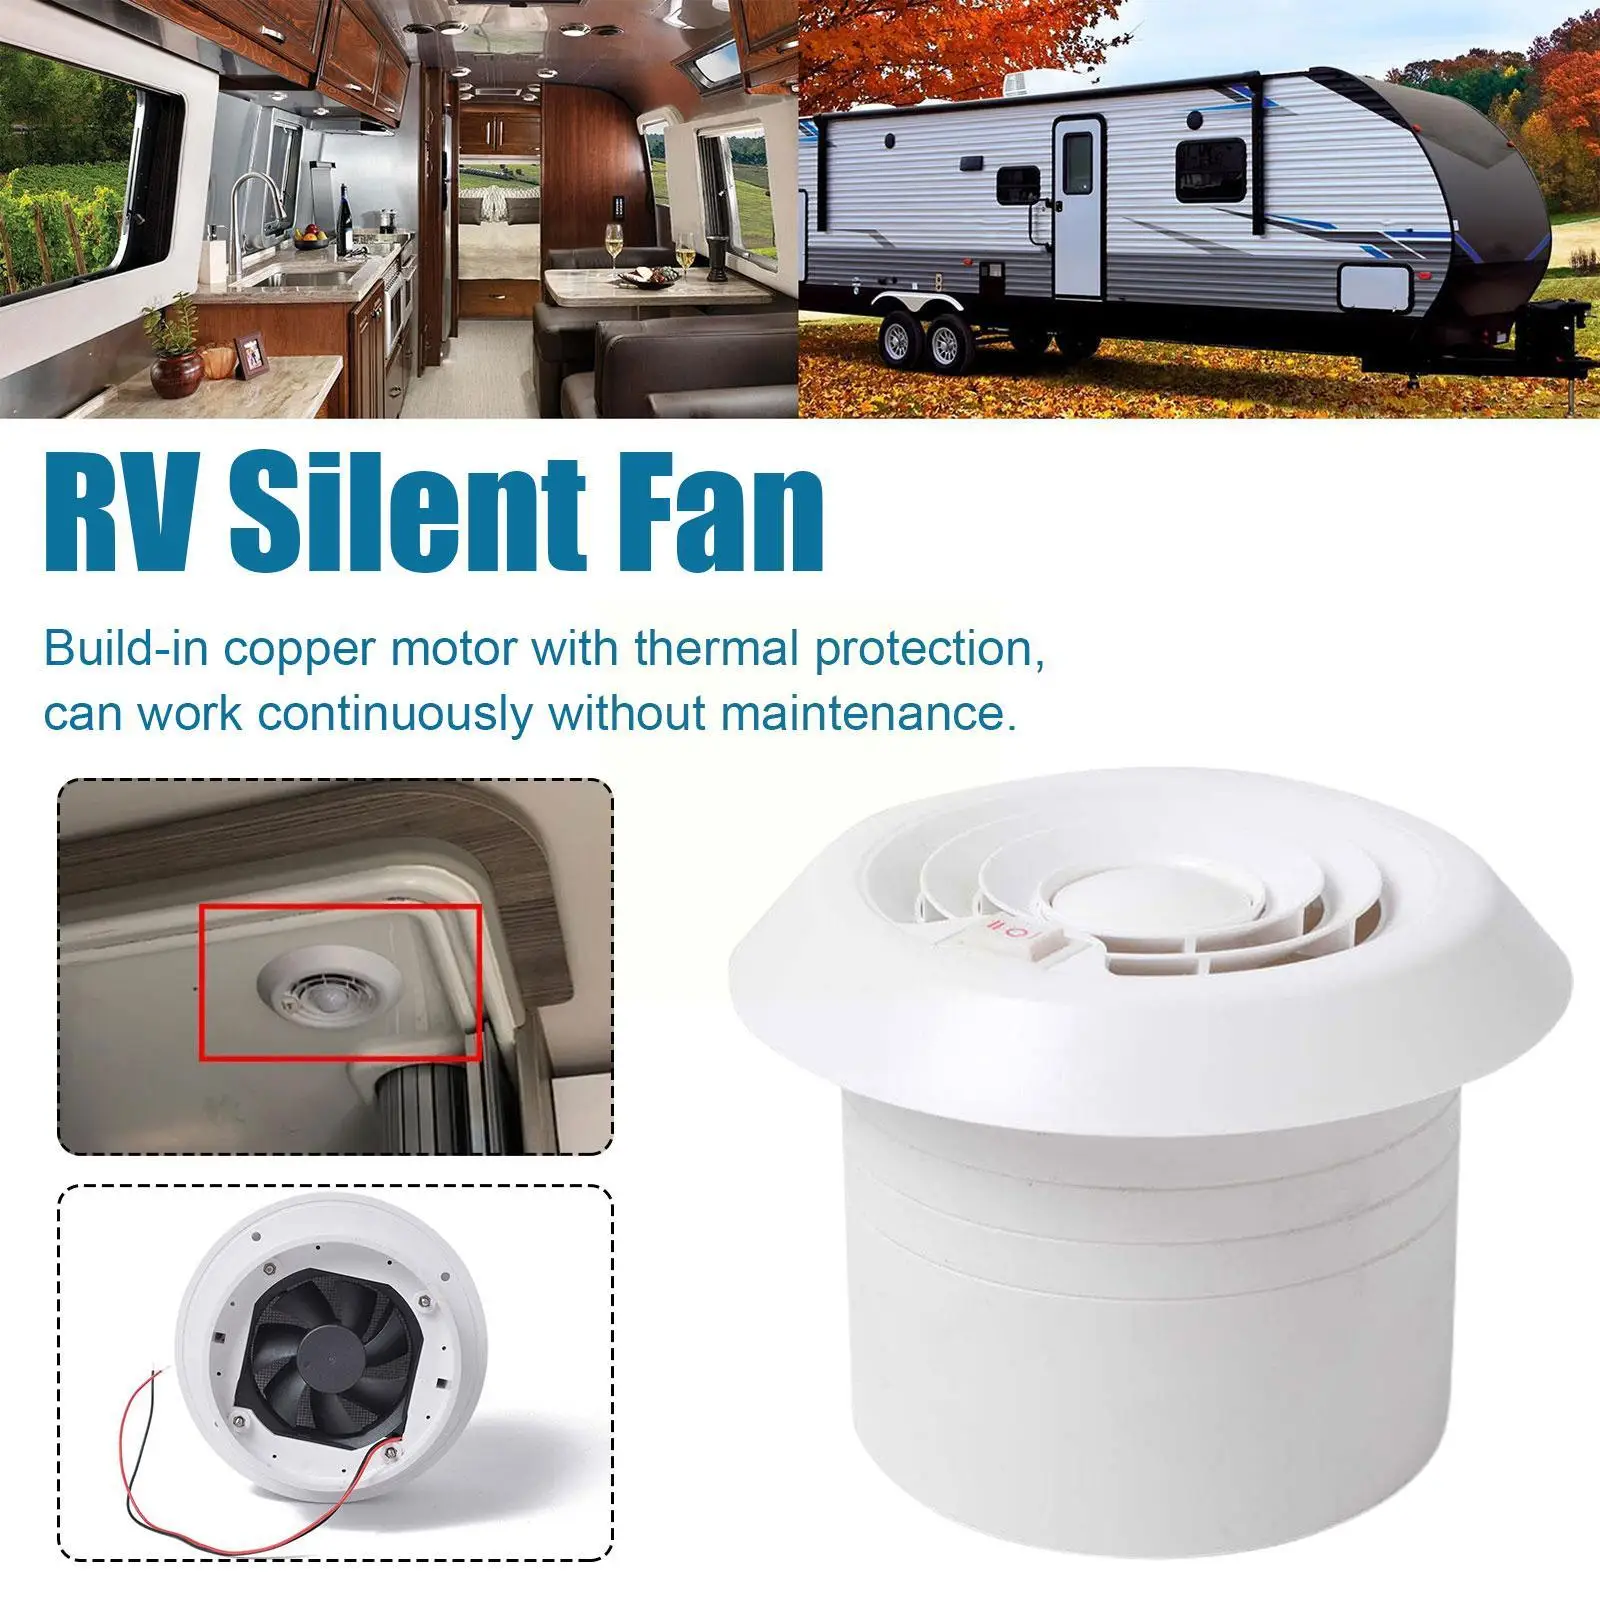 12v Rv Roof Air Vent Round Grille With Silent Fan Summer Travel Air Accessories Car Rv Vent Auto Ceiling Interior Trailer V B5j4 images - 6